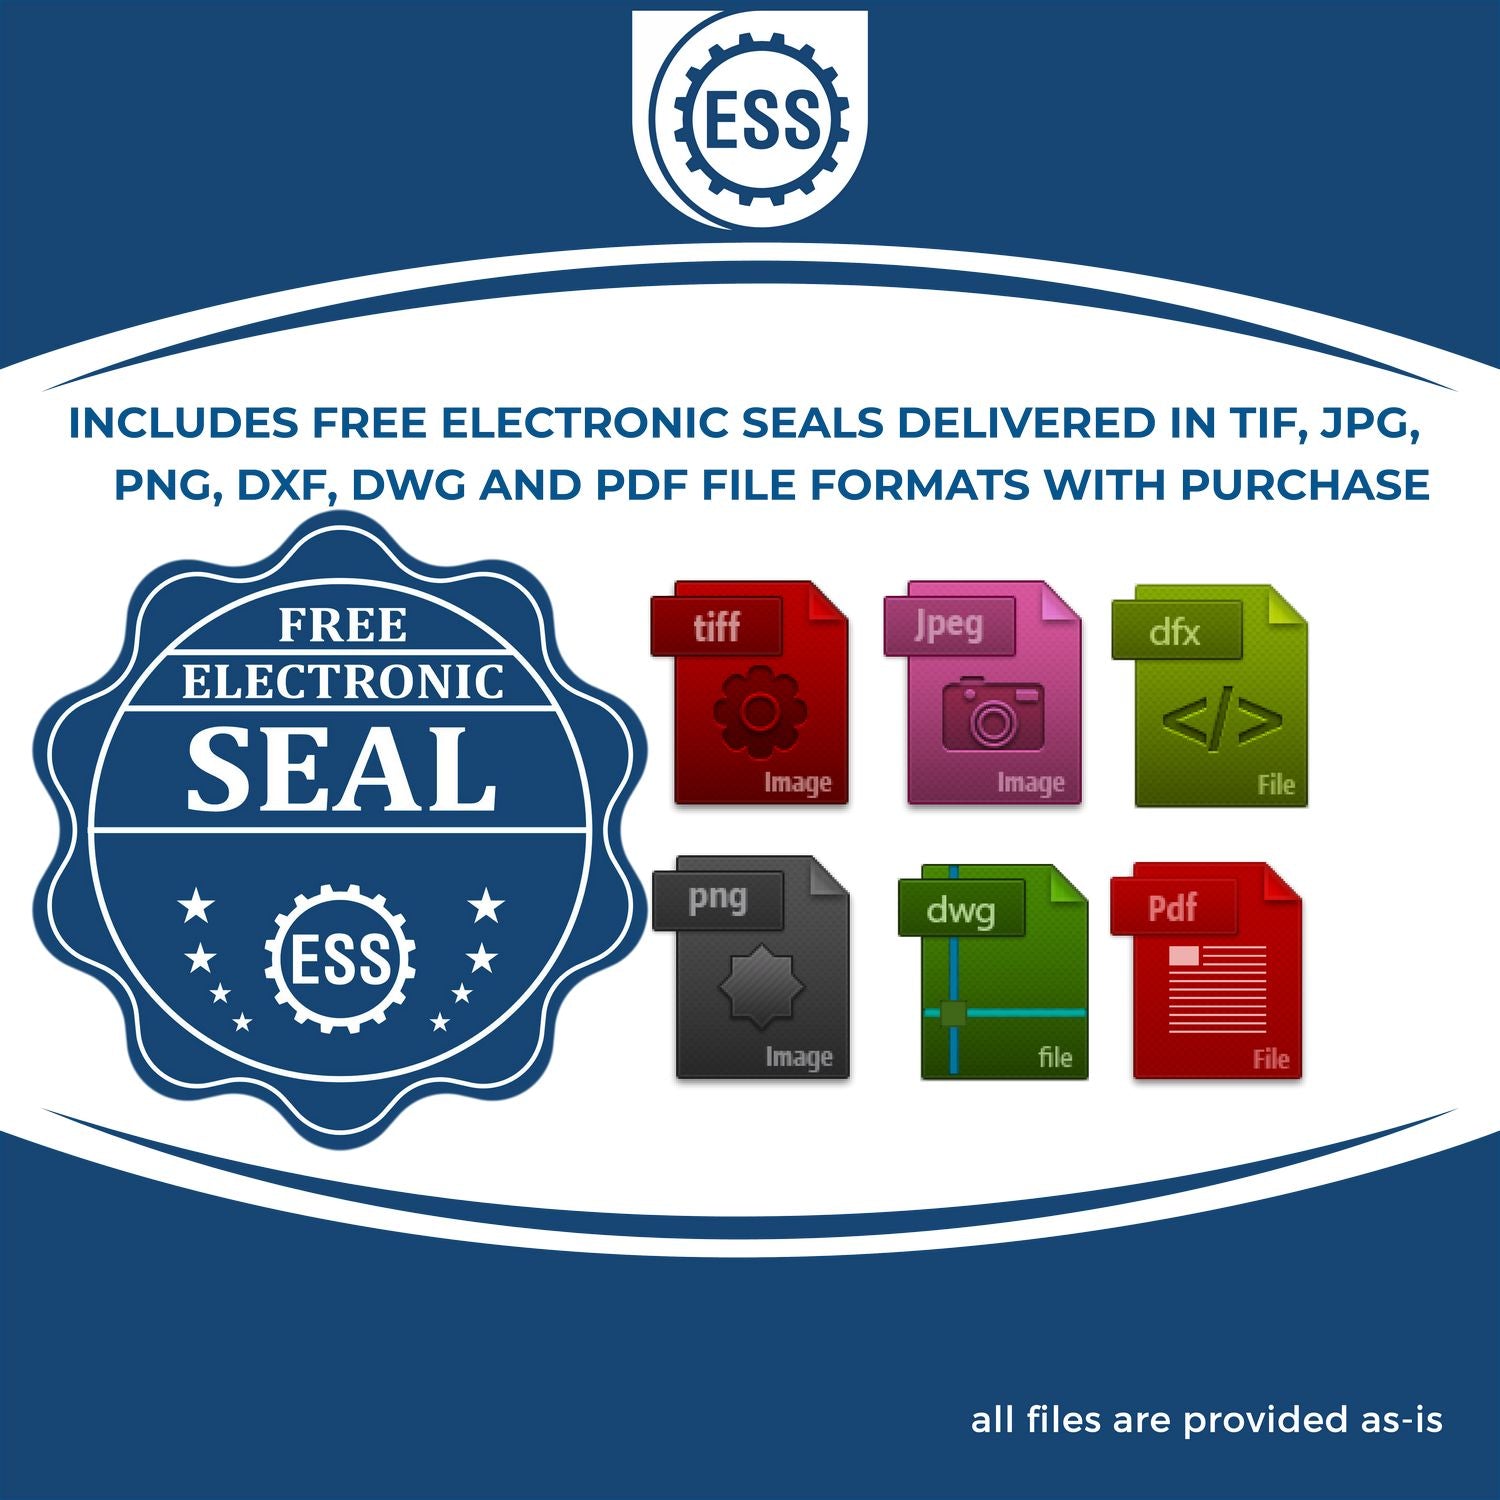 An infographic for the free electronic seal for the Wisconsin Professional Engineer Seal Stamp illustrating the different file type icons such as DXF, DWG, TIF, JPG and PNG.